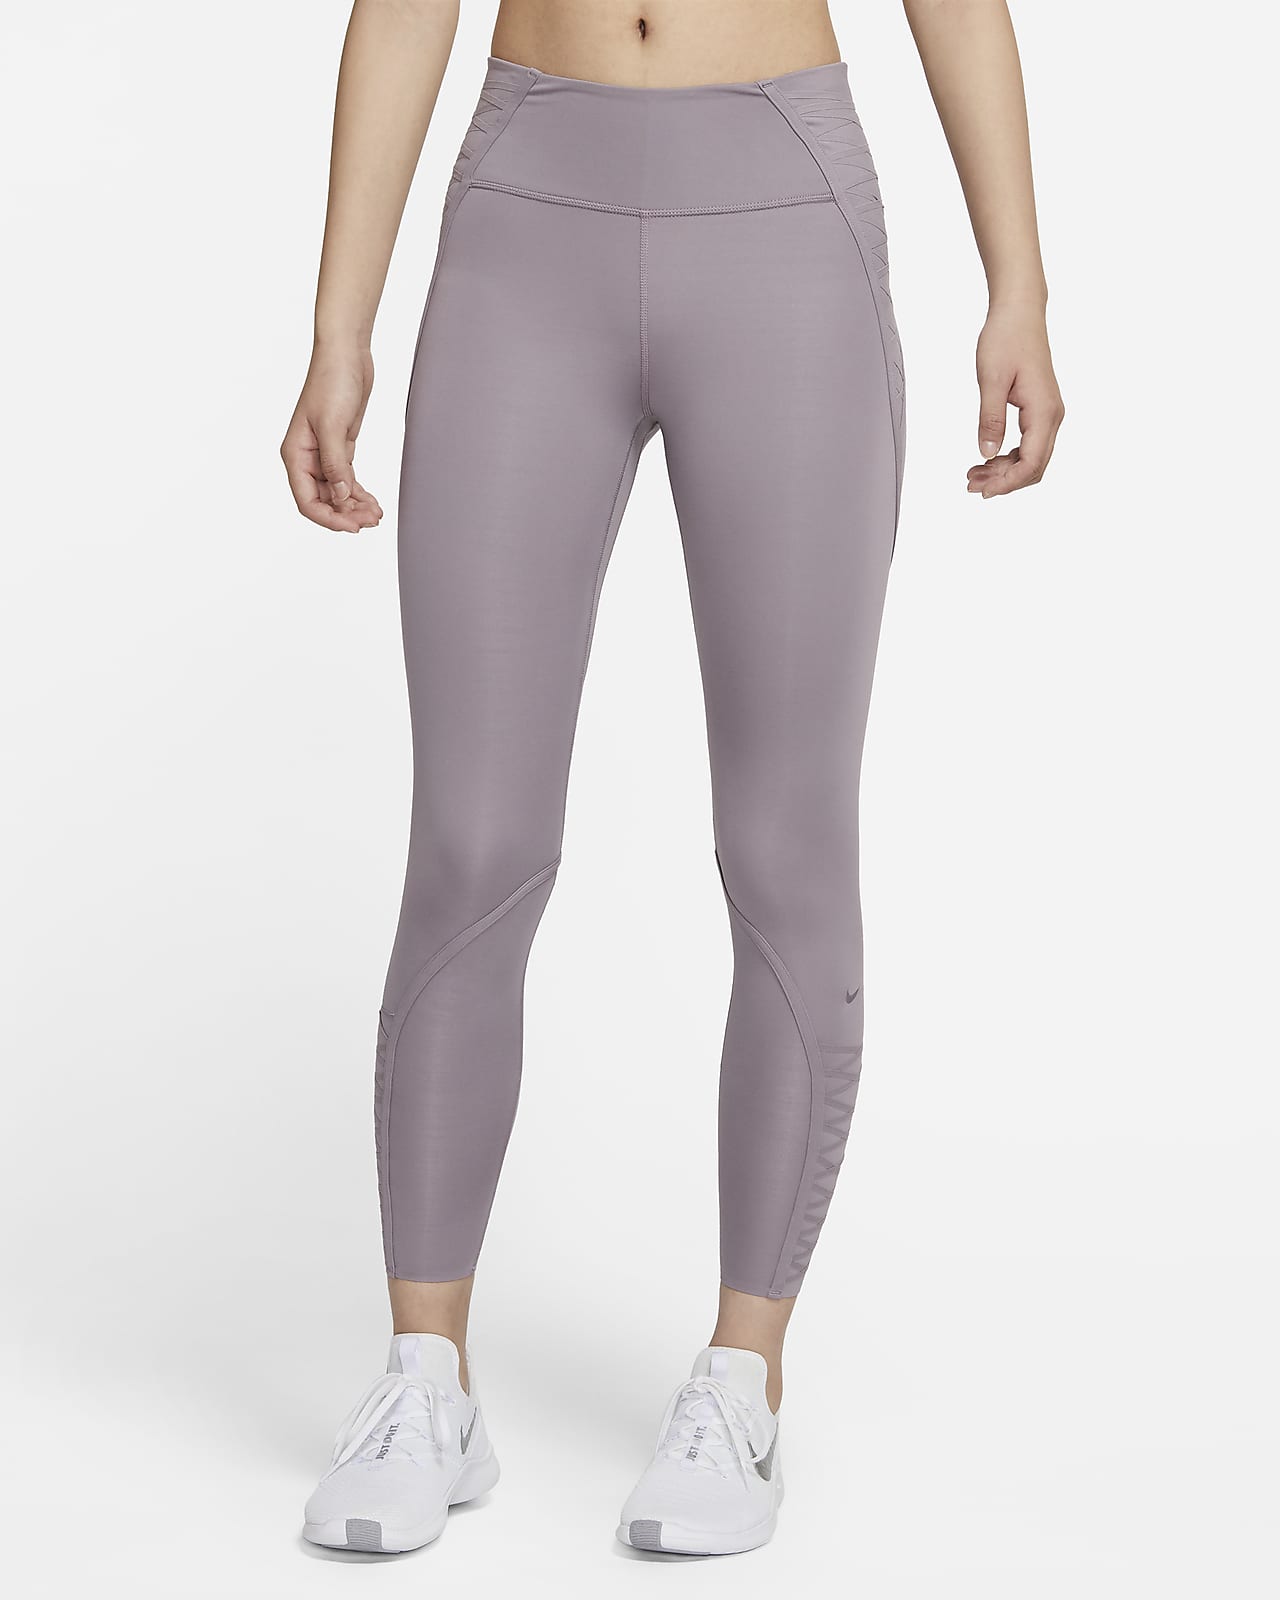 nike one luxe tights review